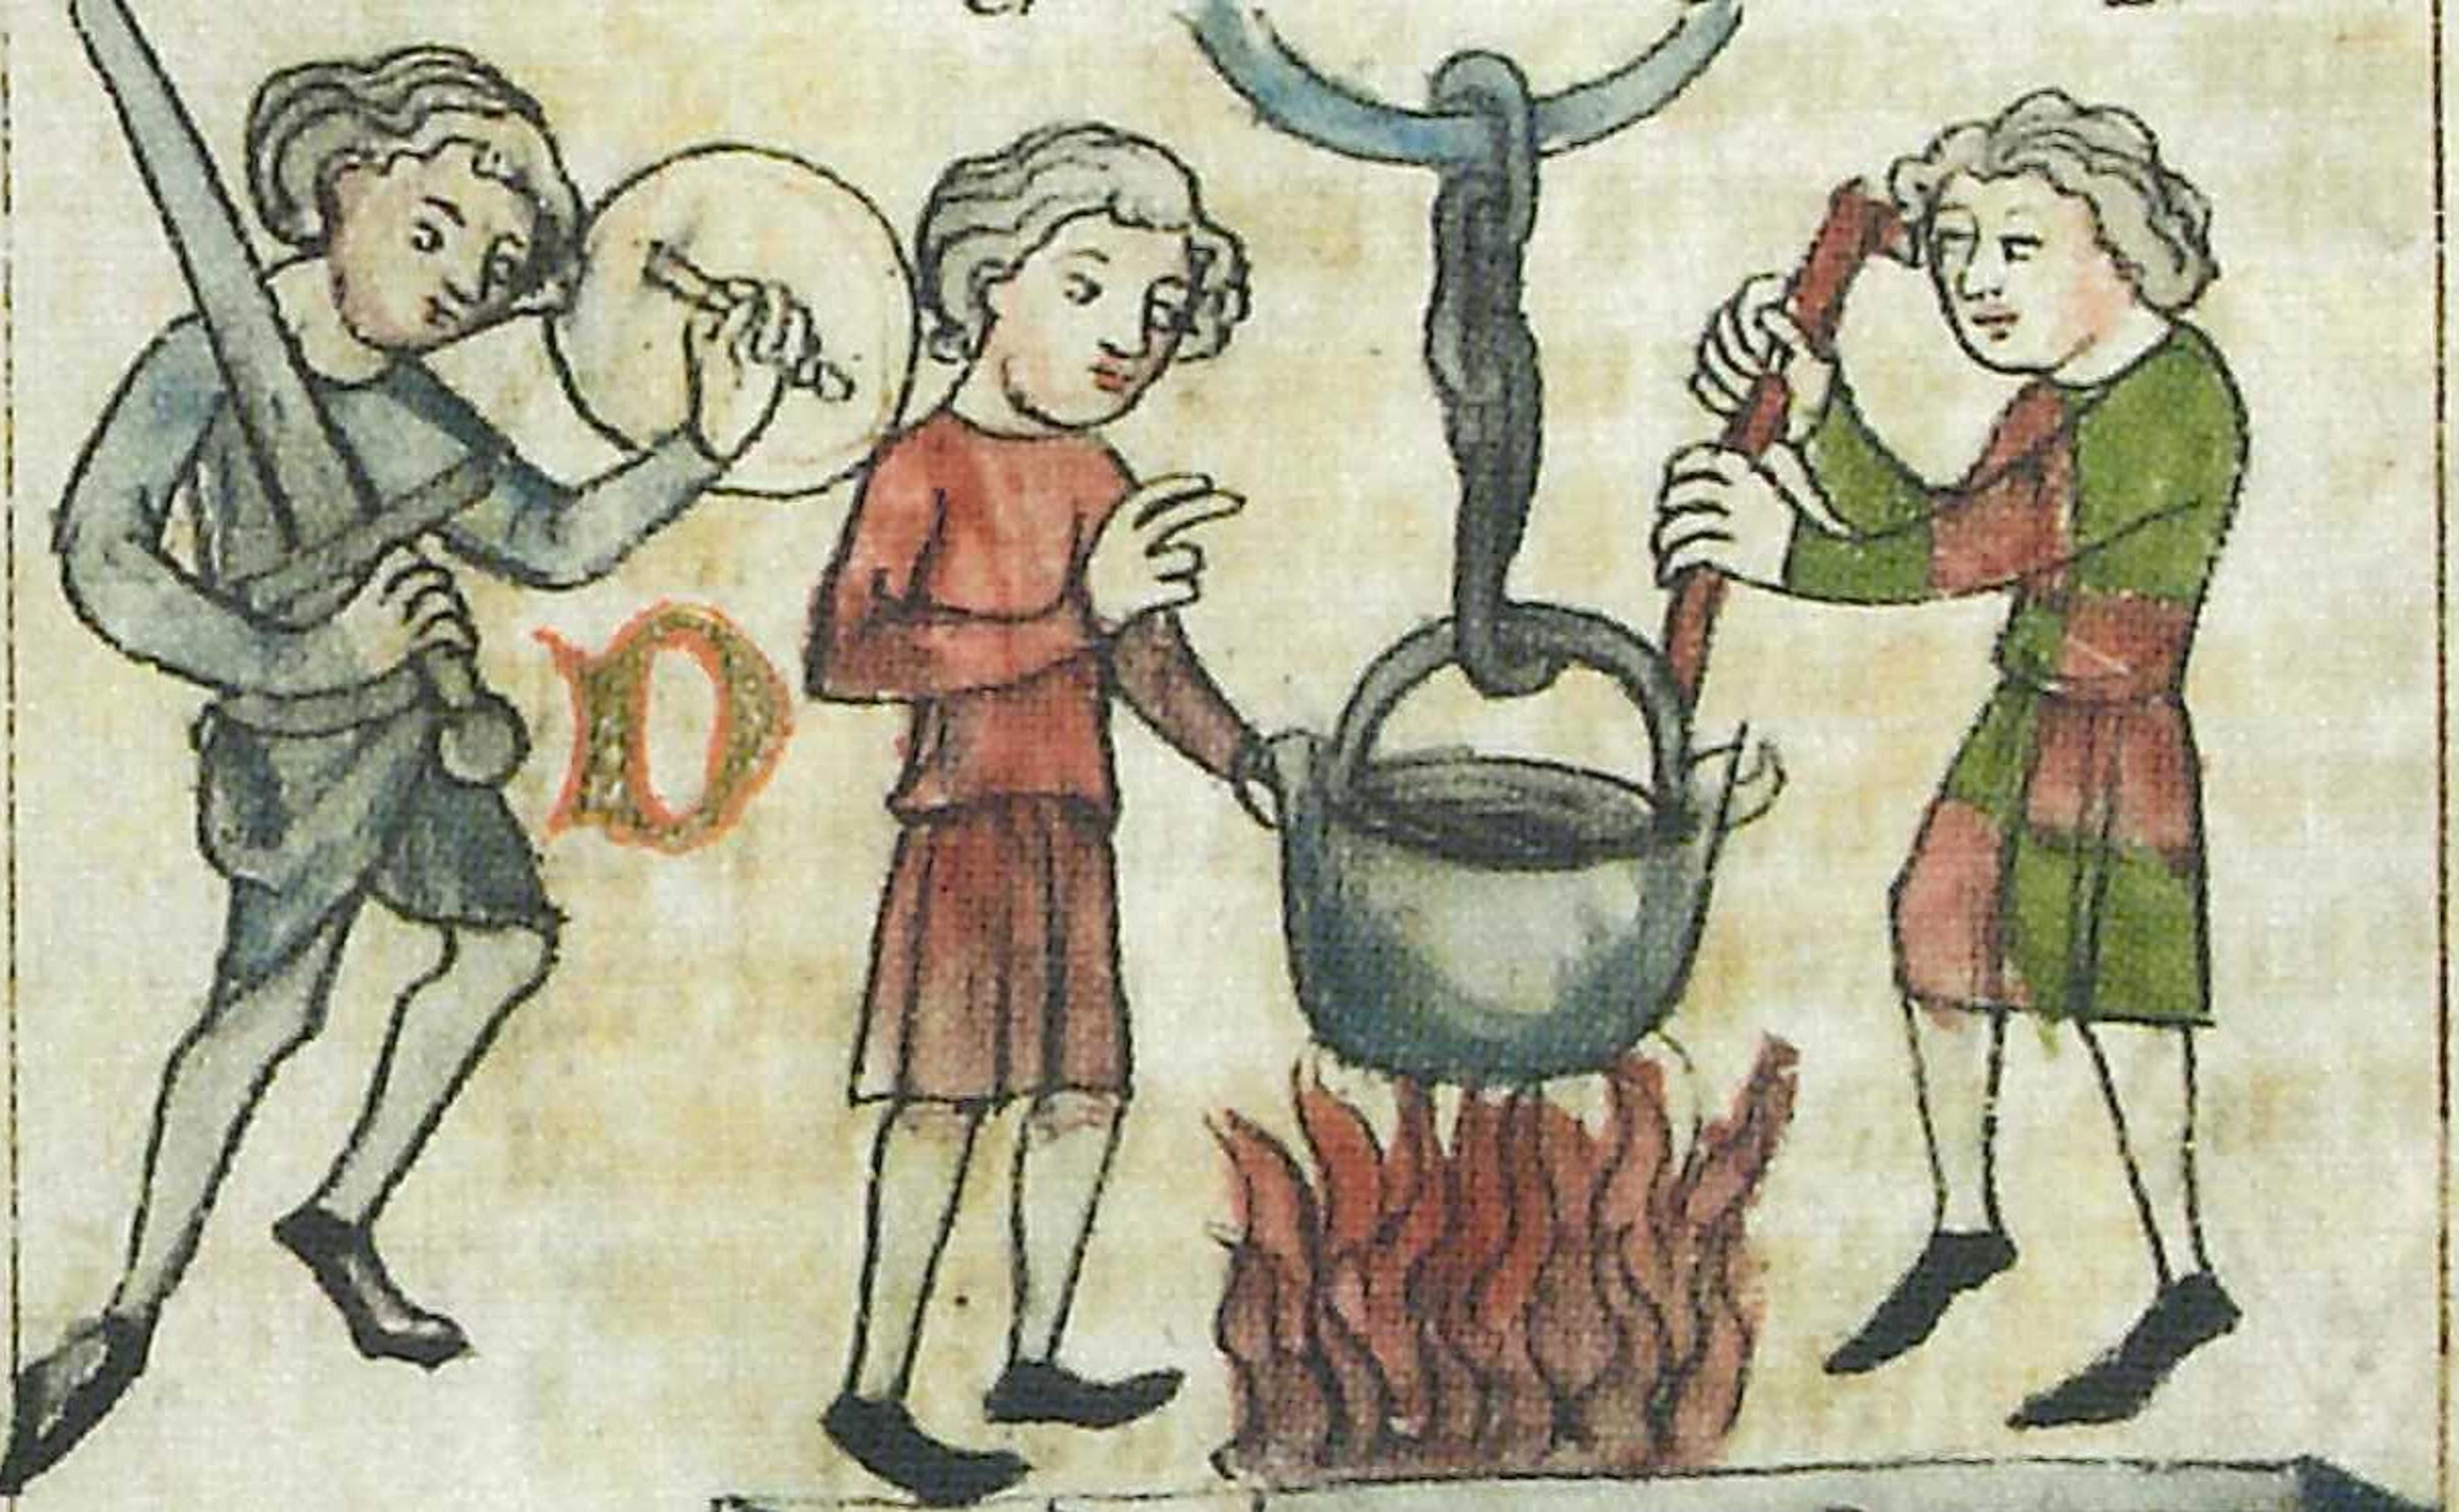 manuscript illustration of the three trials by ordeal - three men depicted, two around a cauldron over a fire and third one holding a sword and shield.